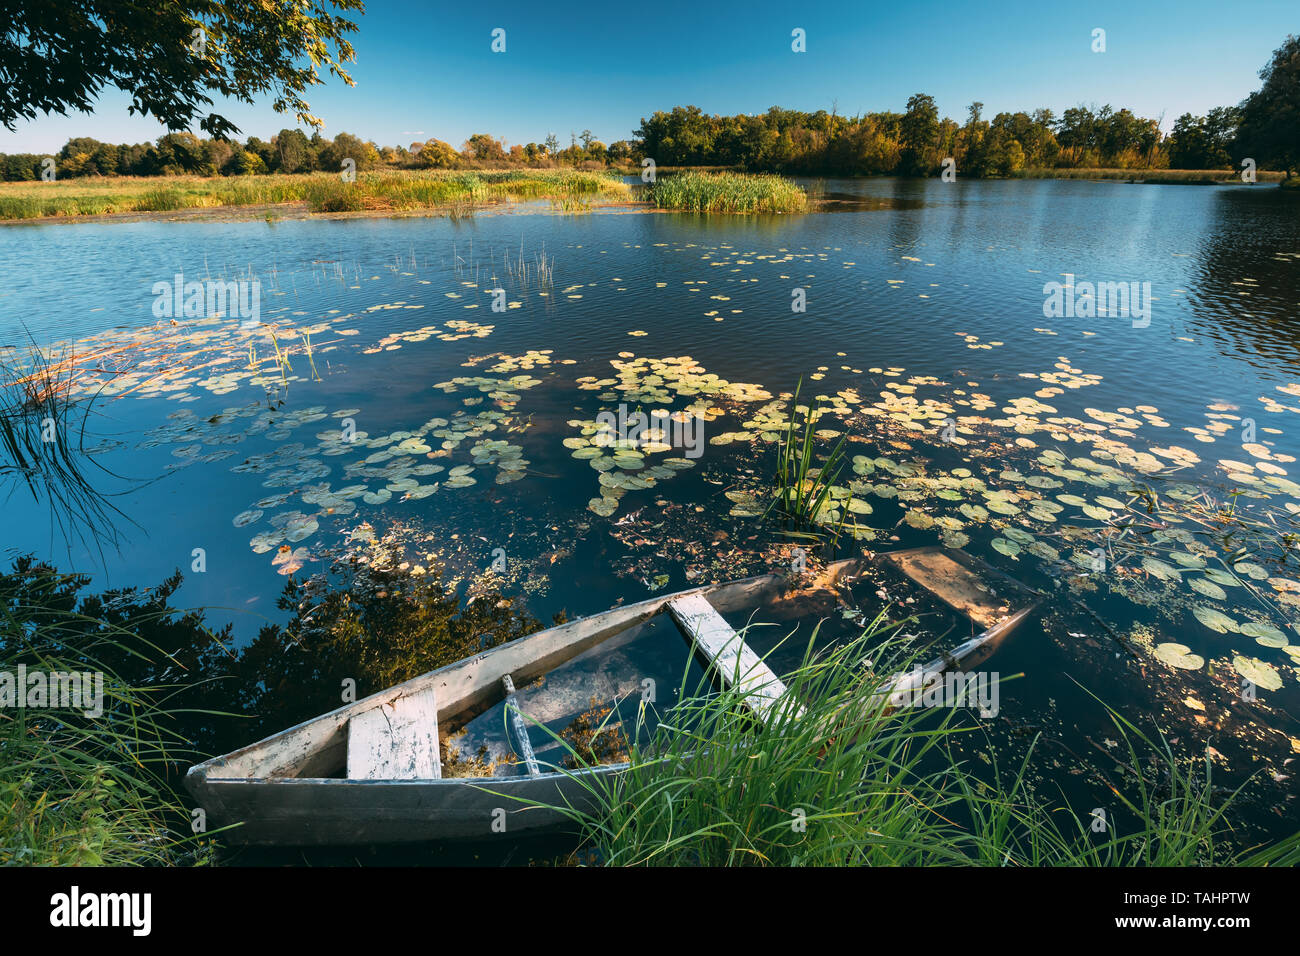 Abandoned Old Wooden Fishing Boat In Summer Lake Or River. Beautiful Summer Sunny Evening. Forsaken Boat. Stock Photo